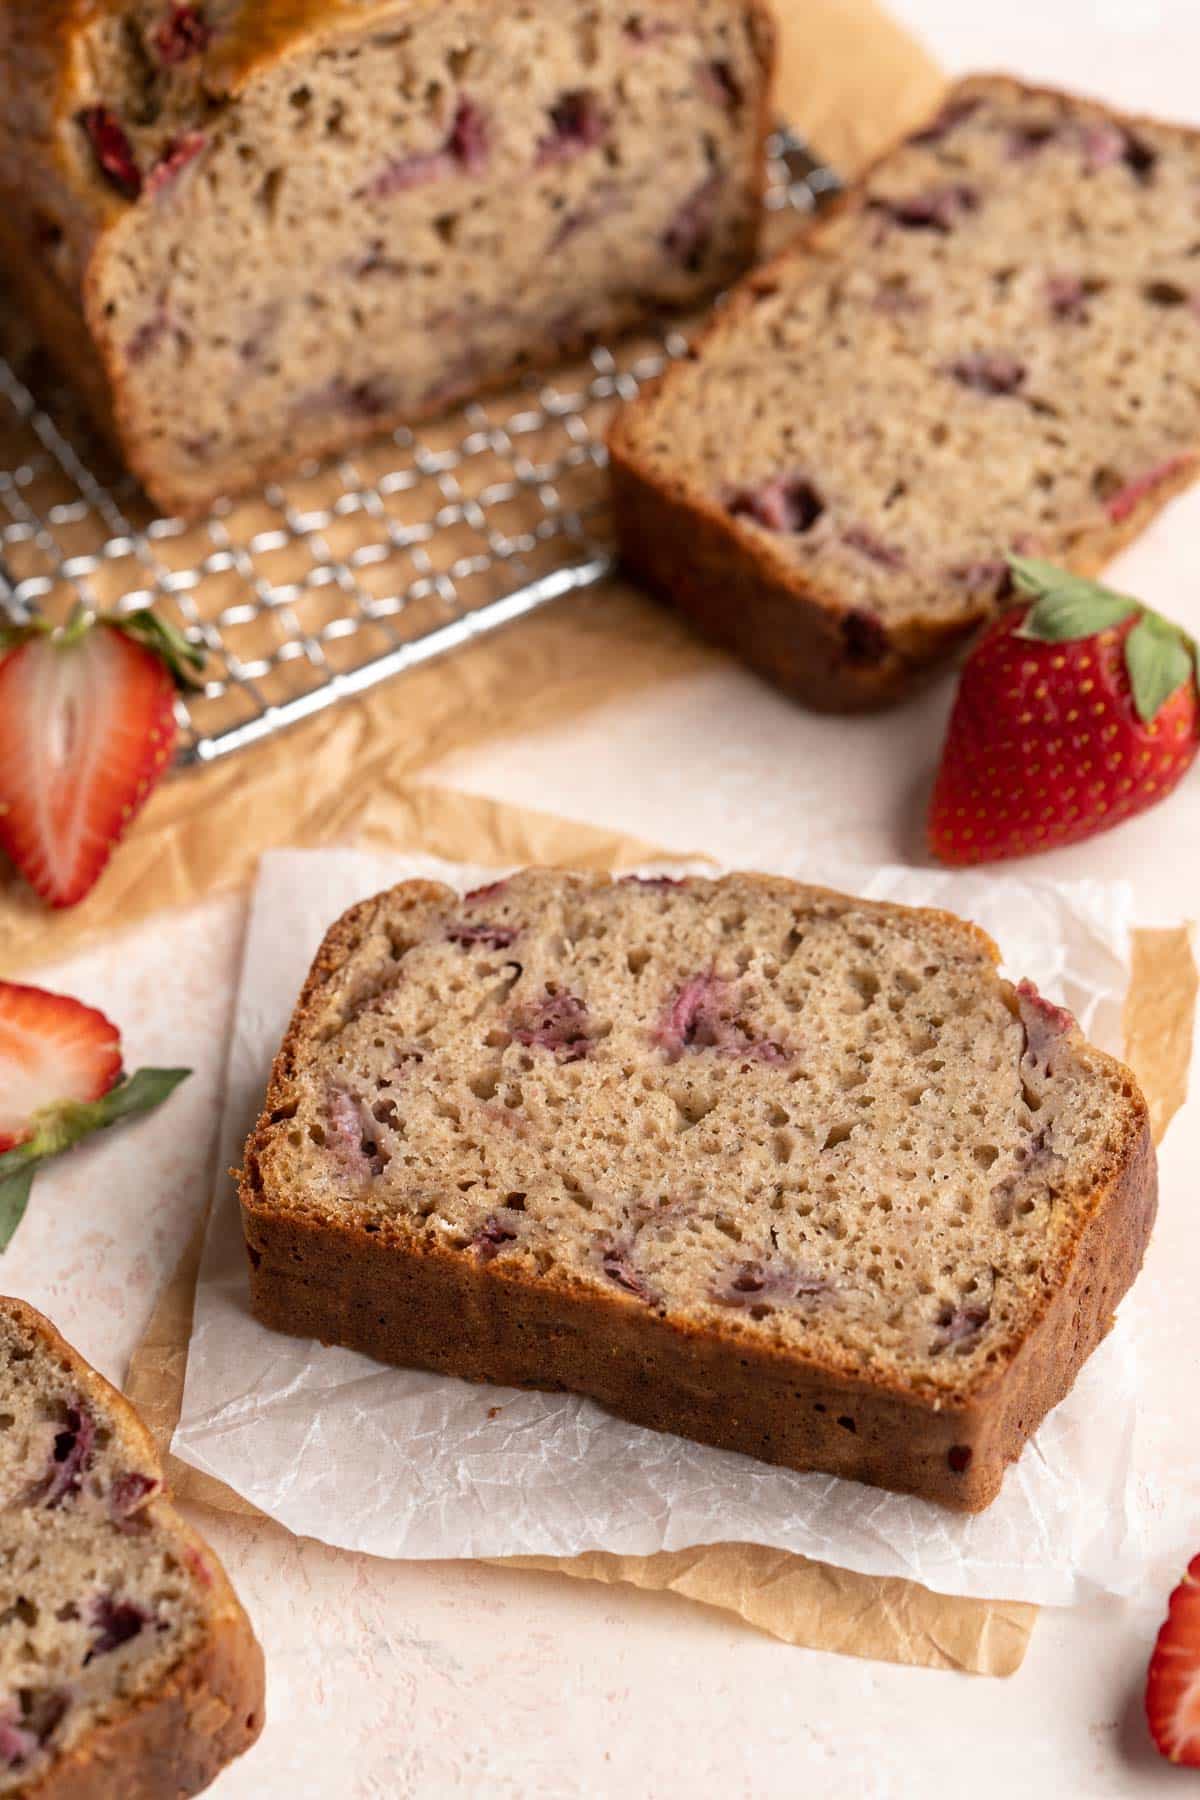 Slices of strawberry banana bread on parchment paper.